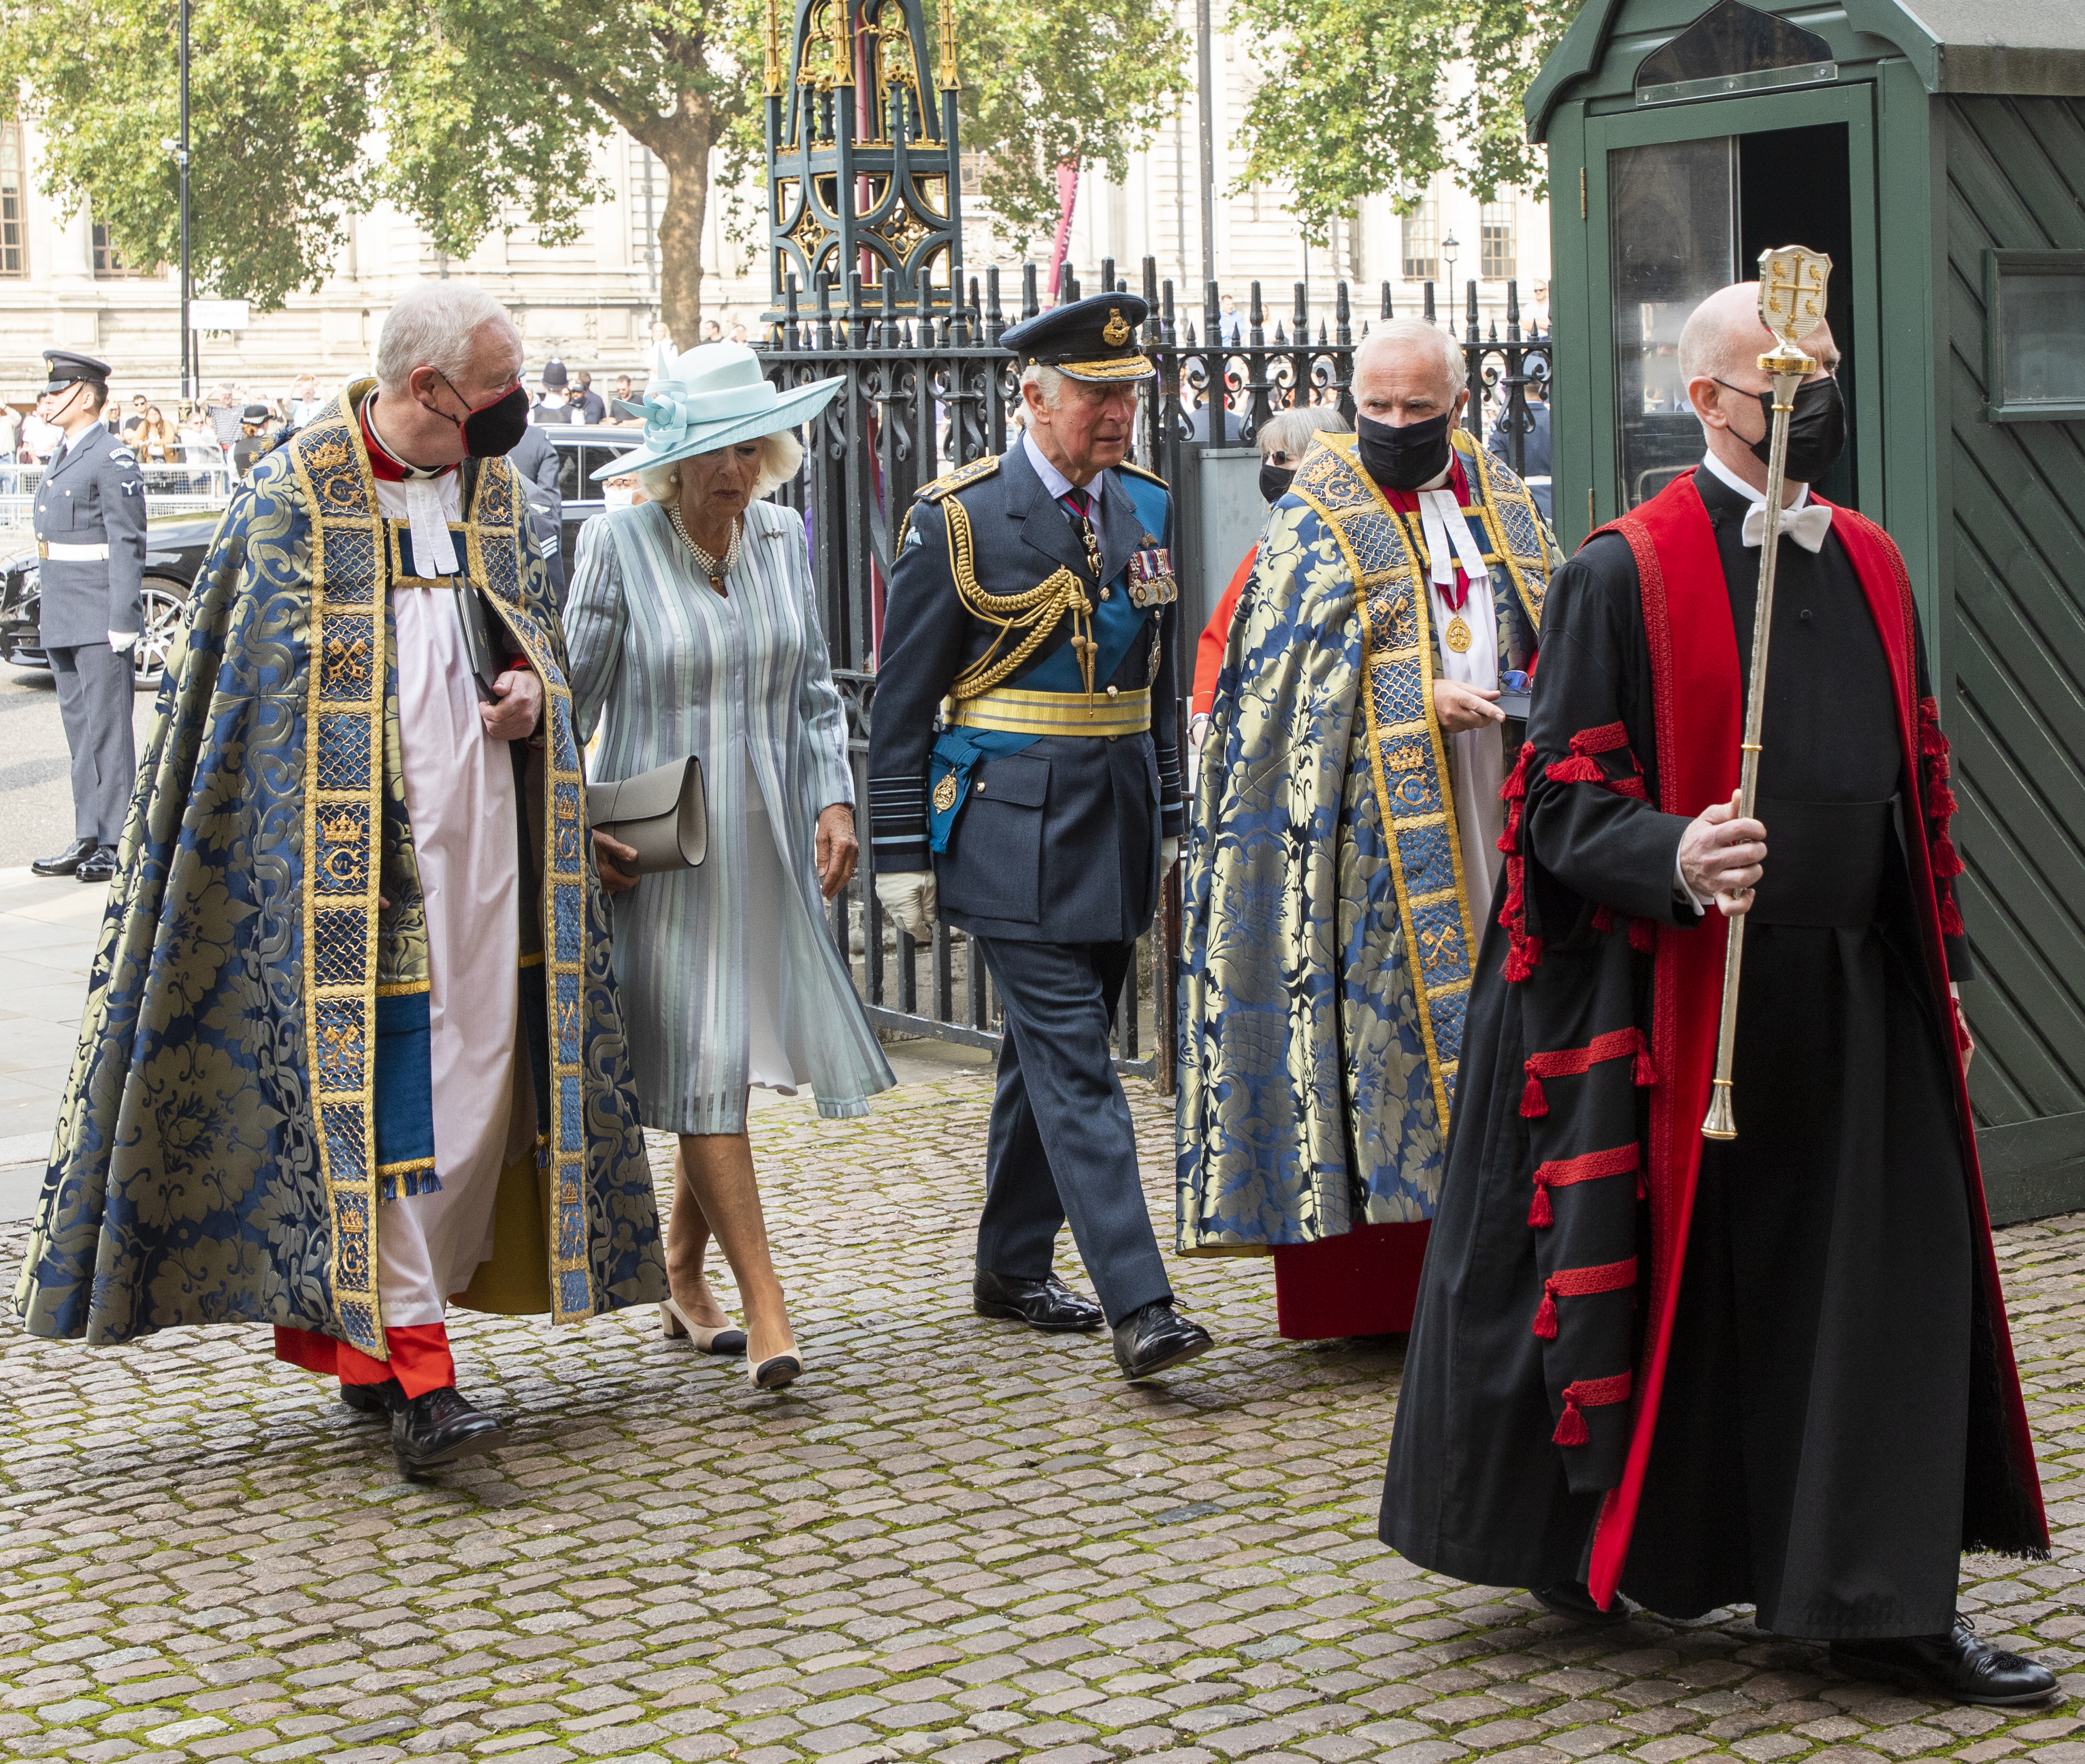 Their Royal Highnesses and Dean of Westminster walk towards Westminster Abbey.